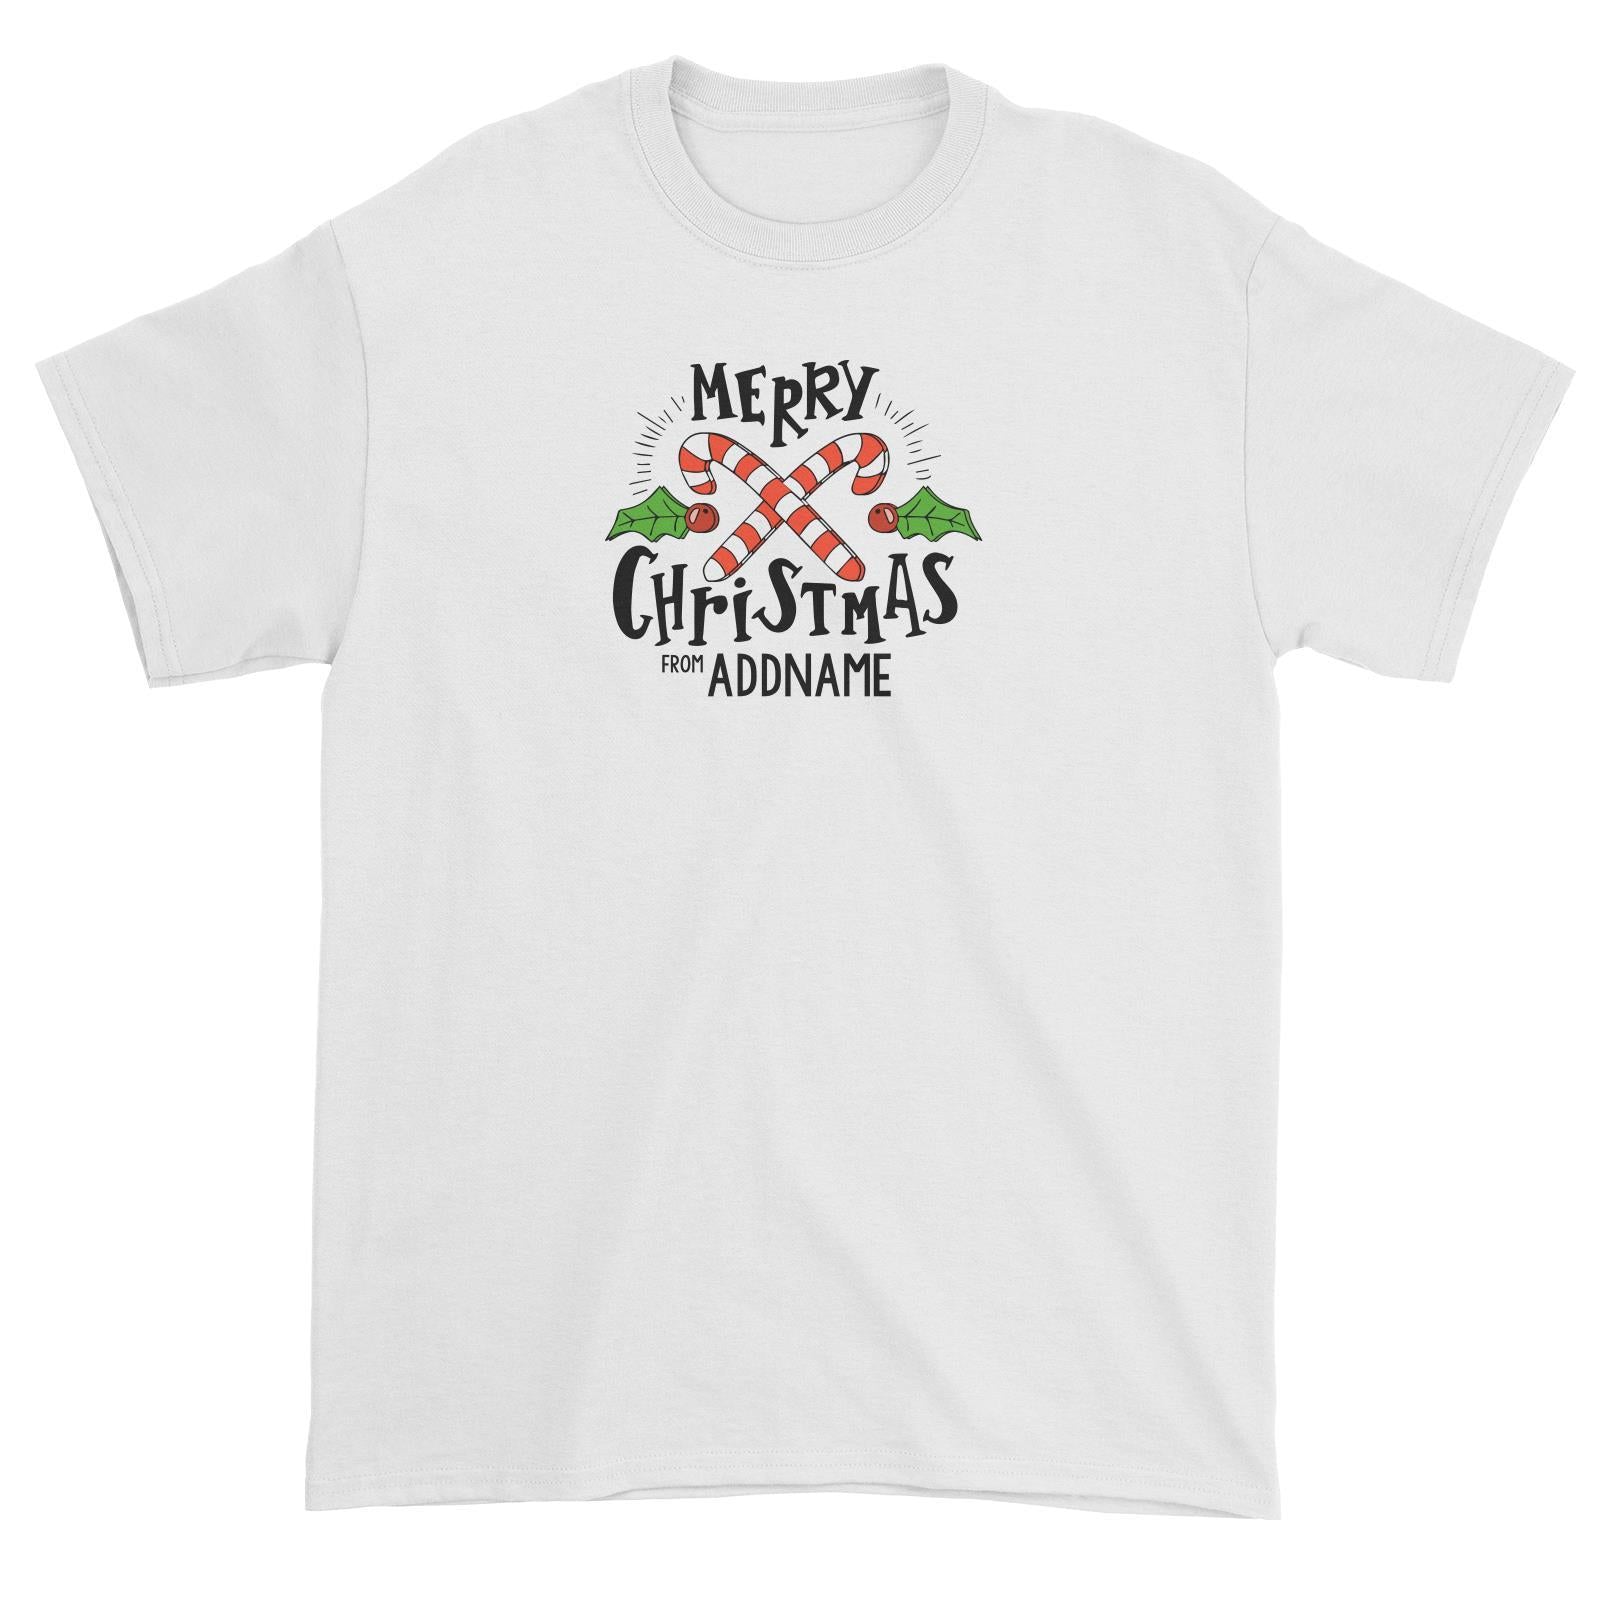 Merry Chrismas with Holly and Candy Cane Greeting Addname Unisex T-Shirt Christmas Matching Family Personalizable Designs Lettering